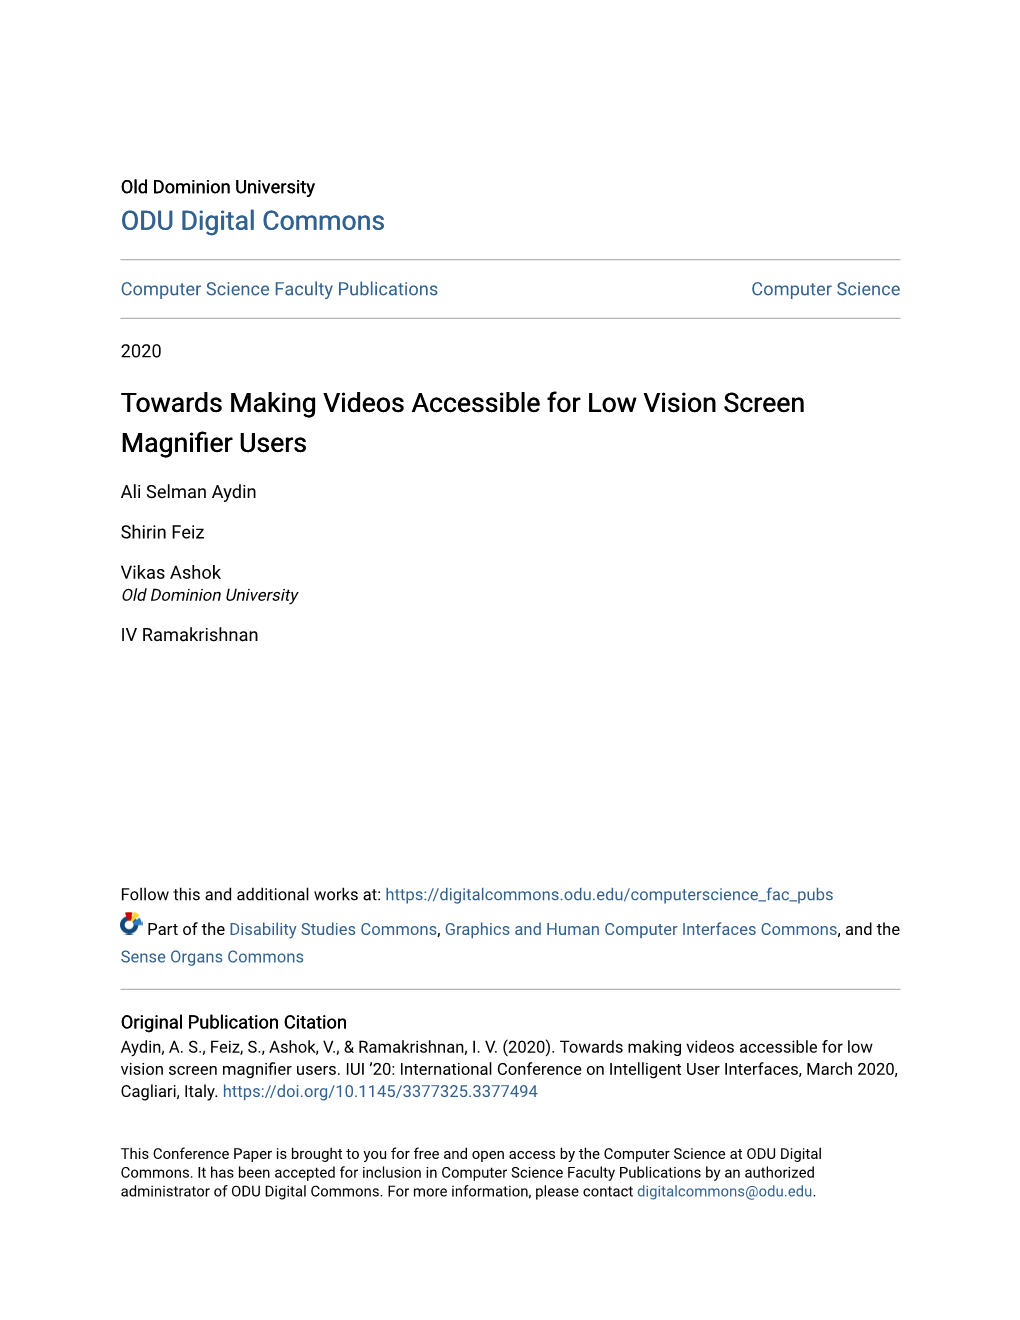 Towards Making Videos Accessible for Low Vision Screen Magnifier Users